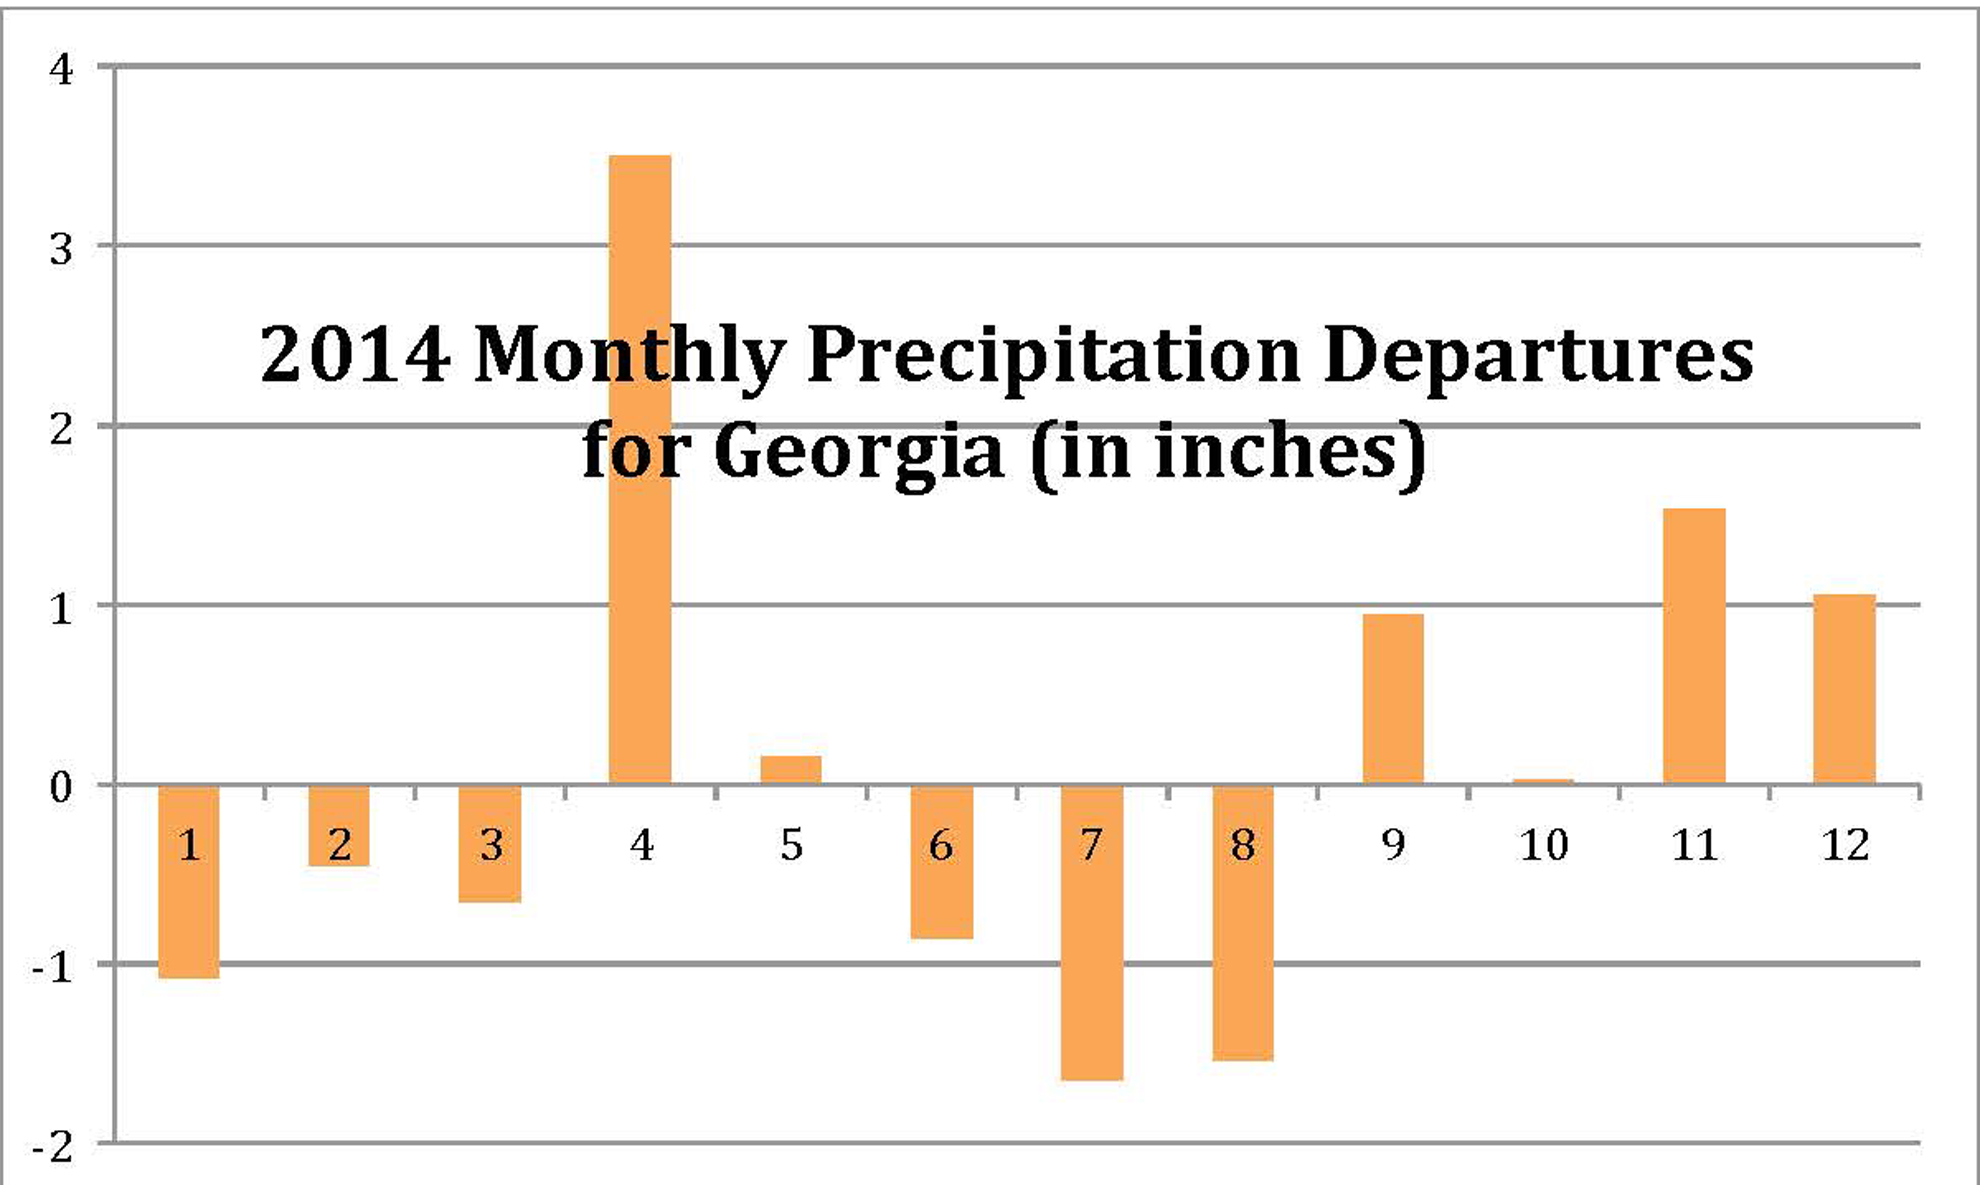 Monthly precipitation departures from the 1901-2000 base period (Data source: National Climatic Data Center)